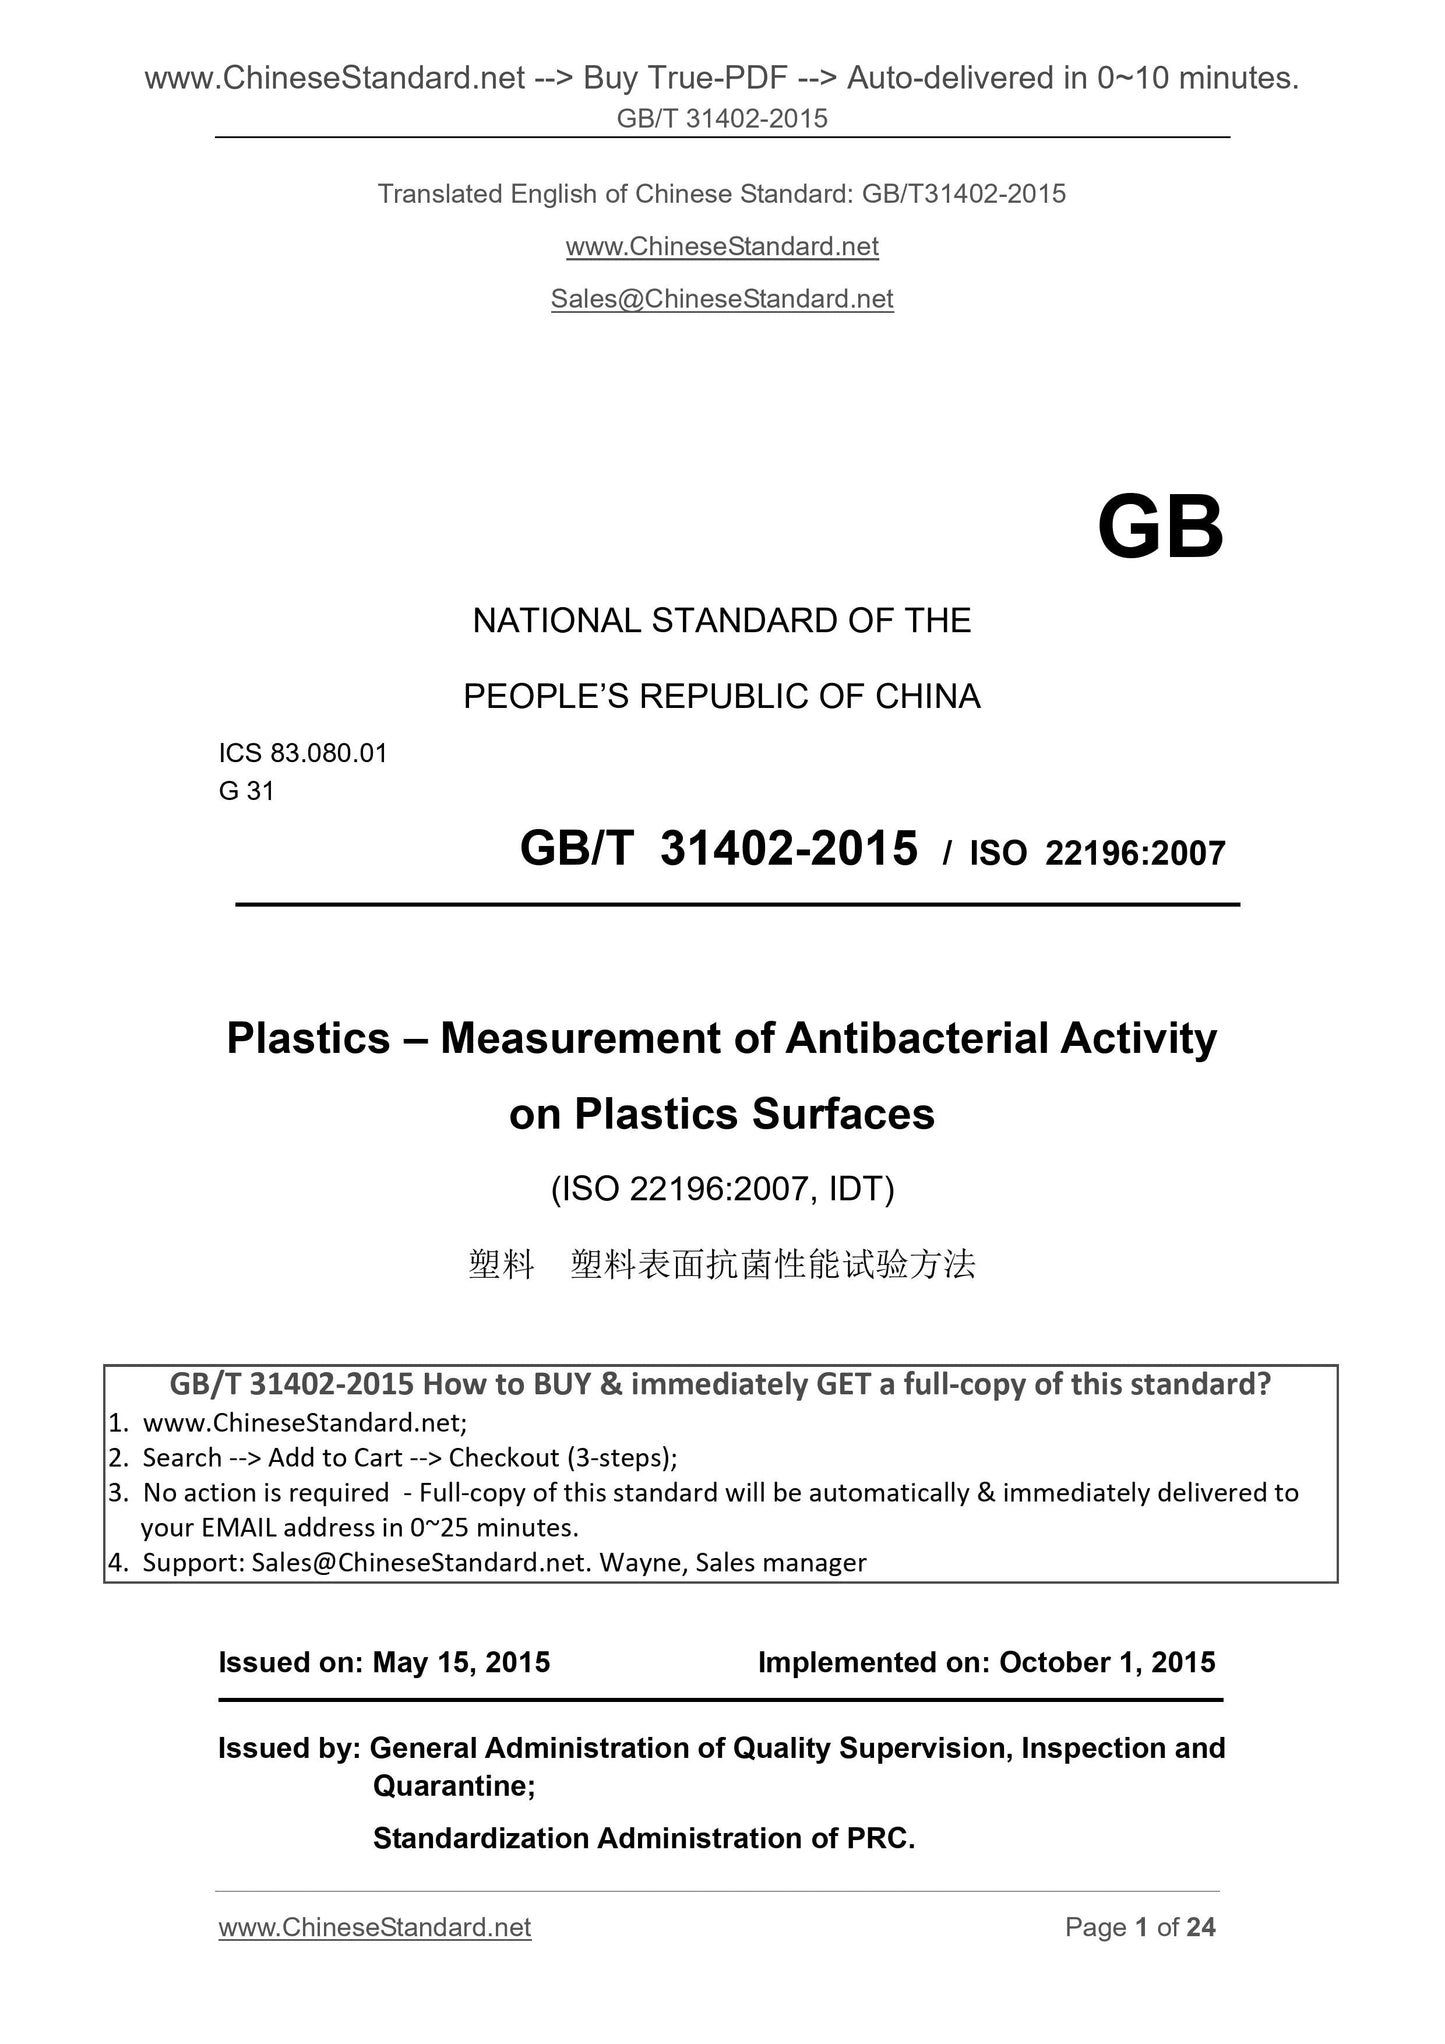 GB/T 31402-2015 Page 1